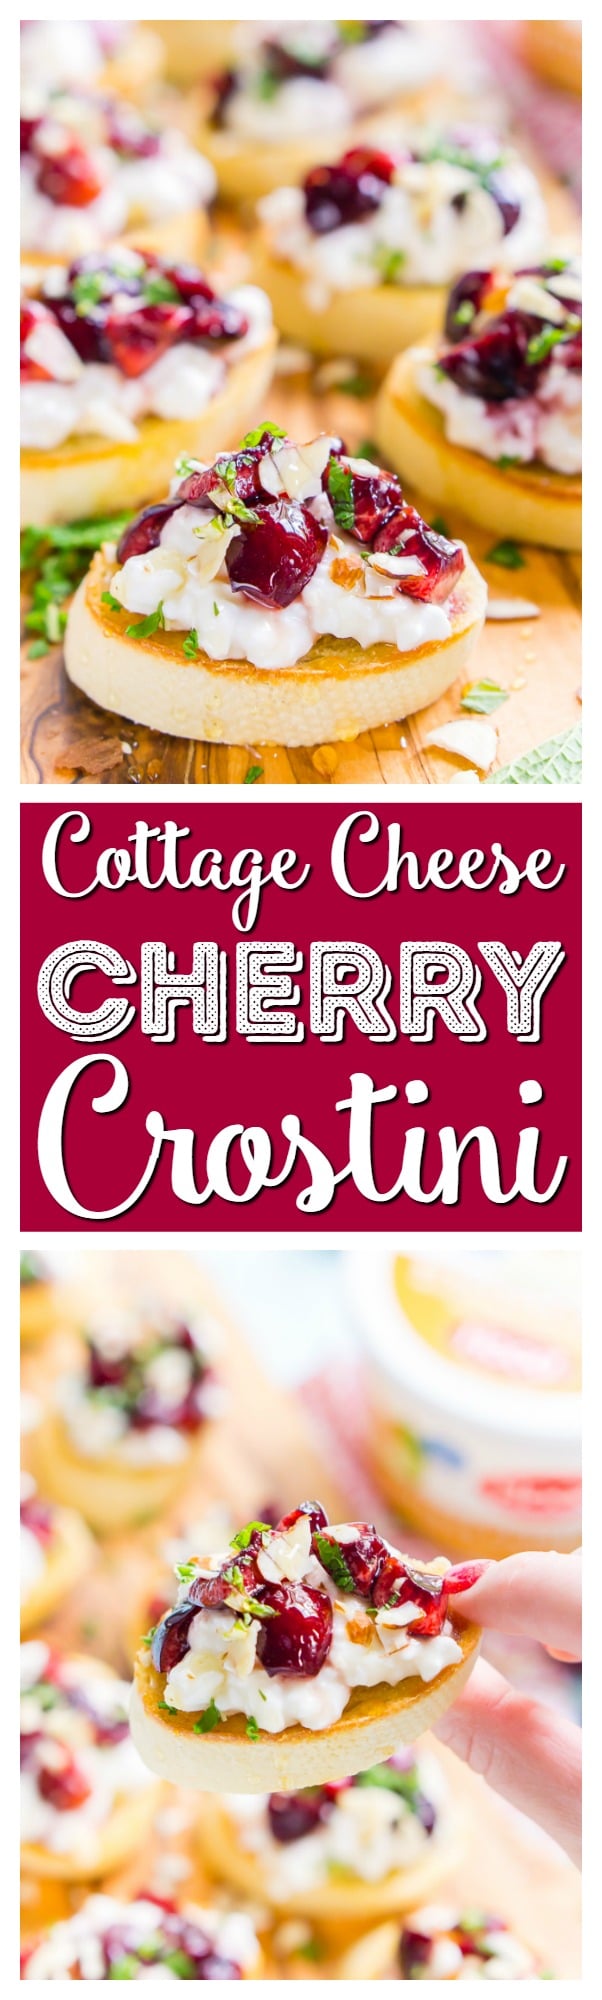 This Cottage Cheese & Cherry Crostini is a fresh and delicious appetizer recipe. Toasted bread topped with silky cottage cheese, cherries, almonds, honey, and mint! via @sugarandsoulco